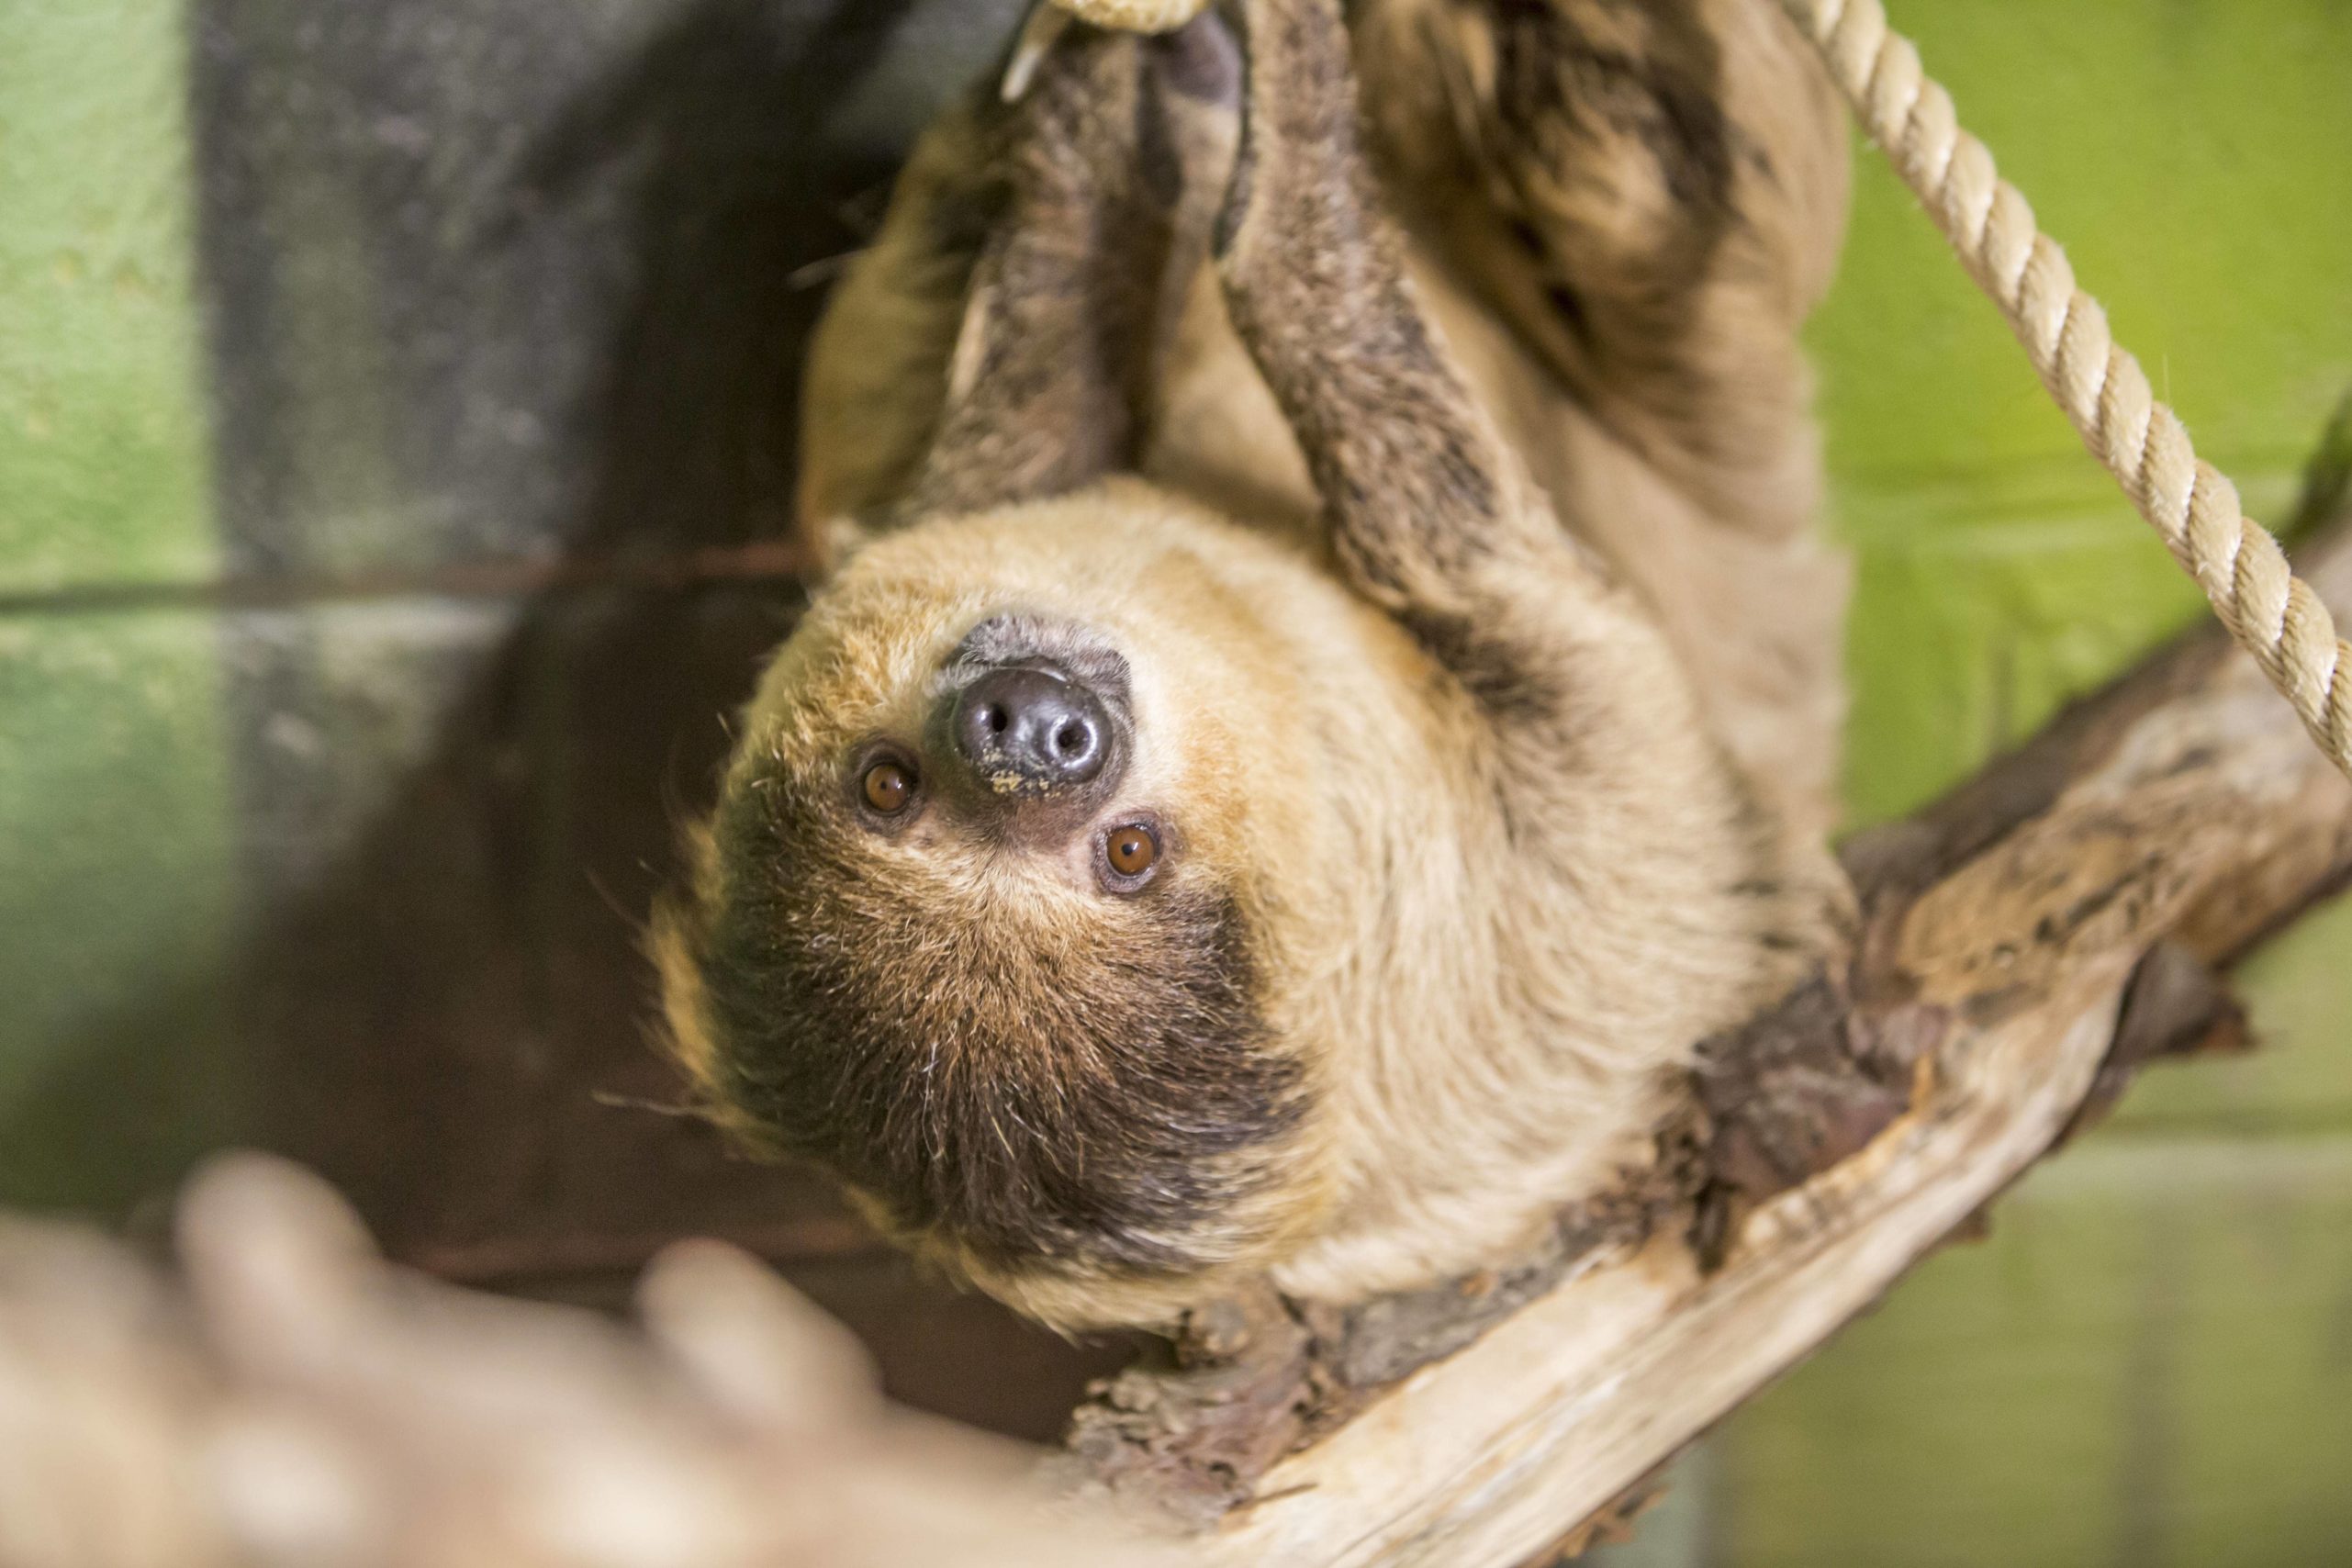 A sloth hanging from a branch